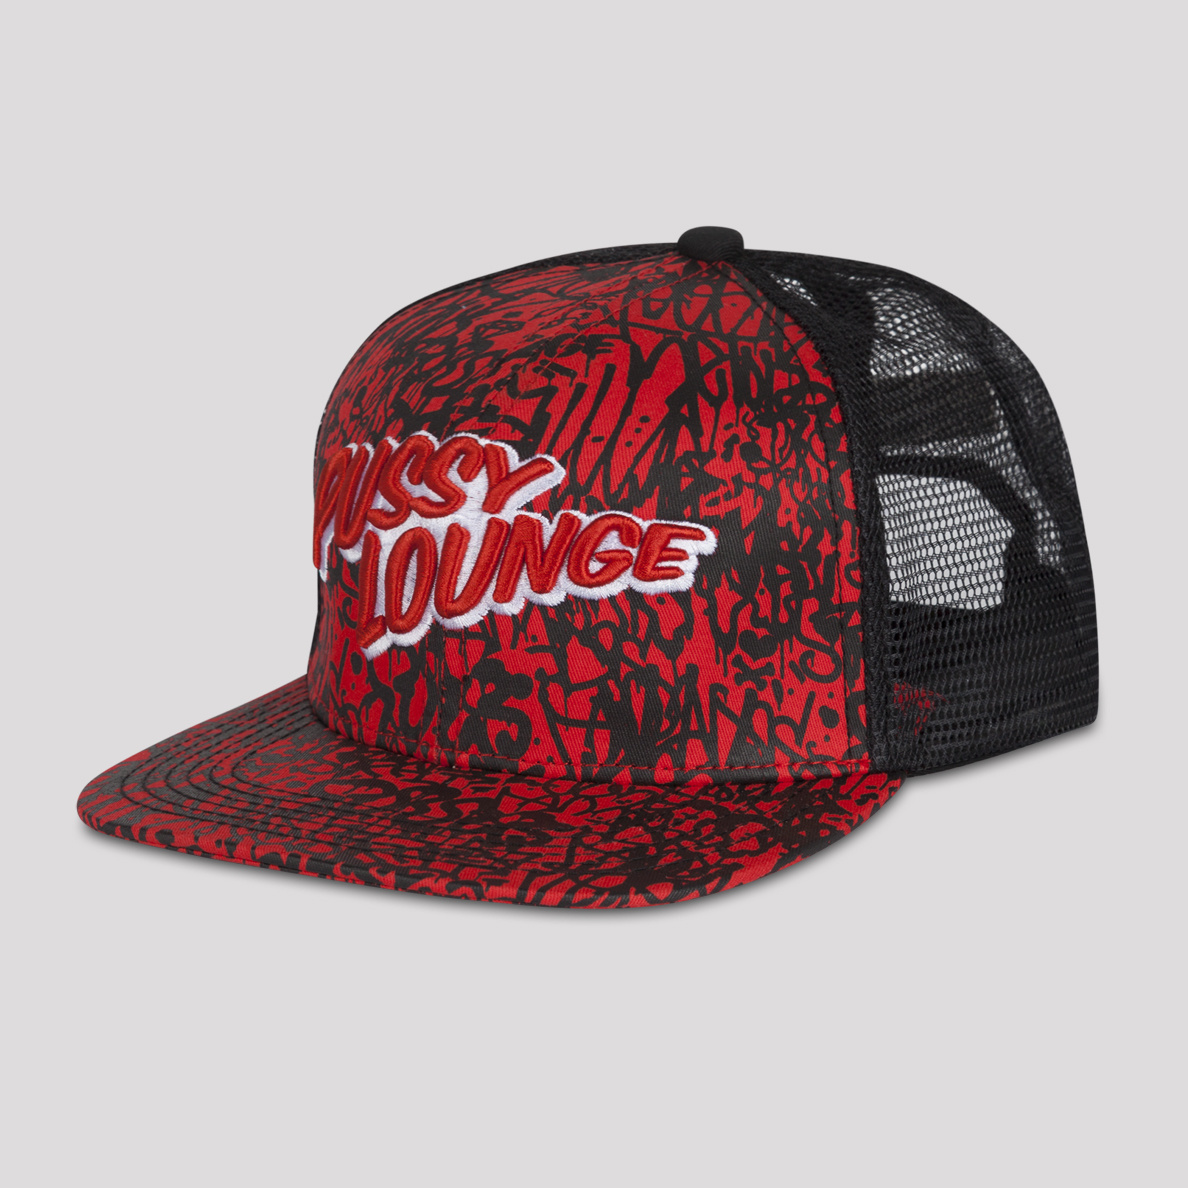 Pussy Lounge truckercap red camo all over print